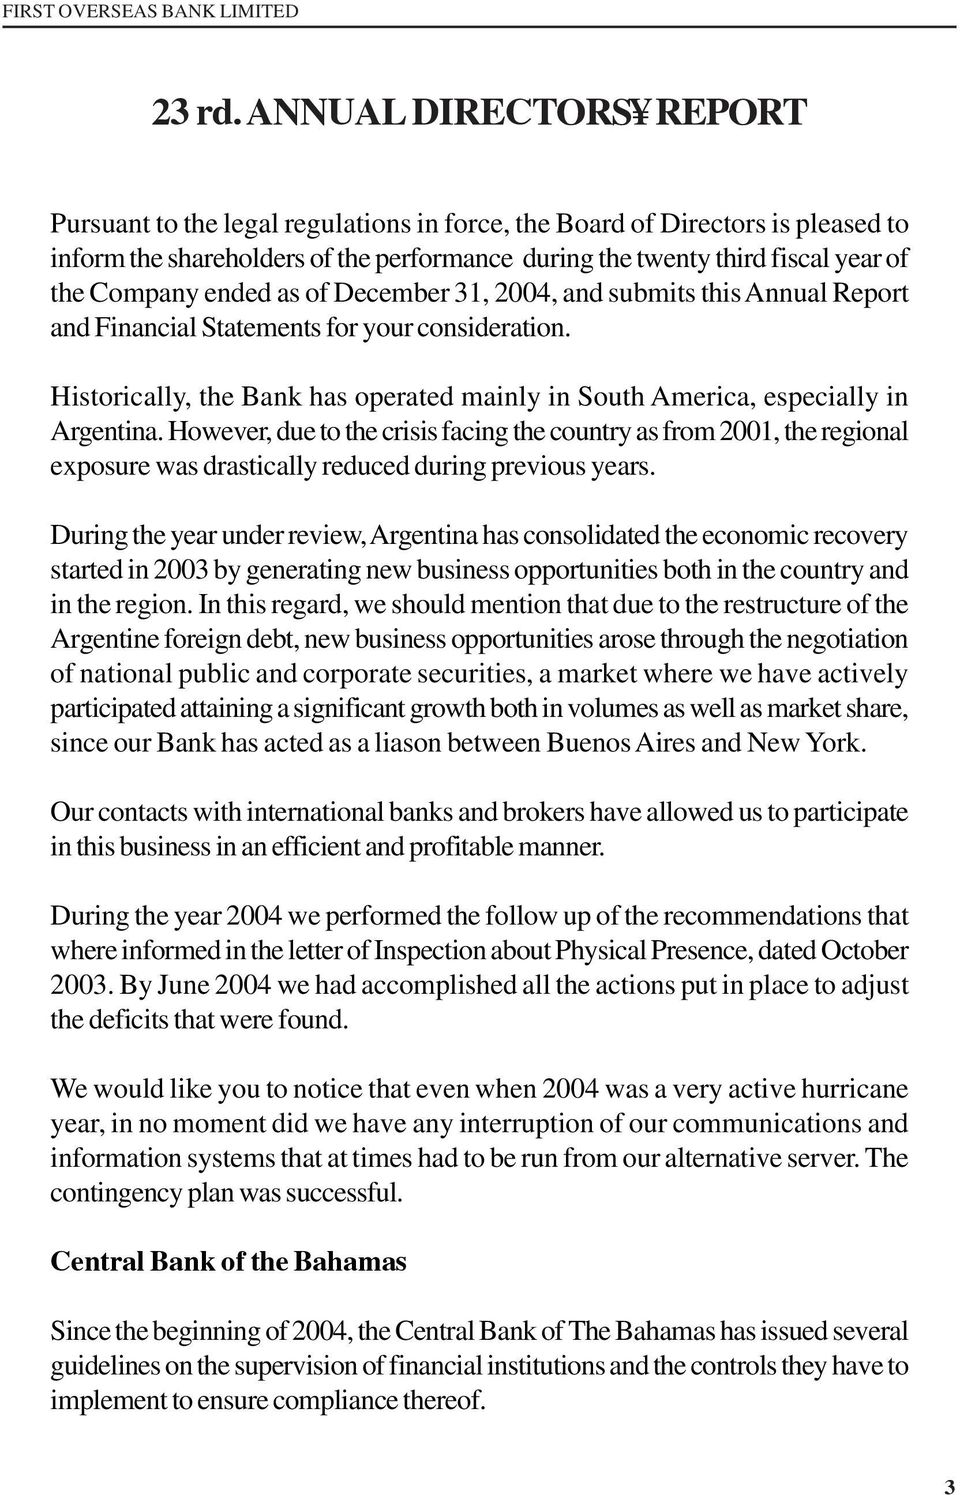 ended as of December 31, 2004, and submits this Annual Report and Financial Statements for your consideration. Historically, the Bank has operated mainly in South America, especially in Argentina.